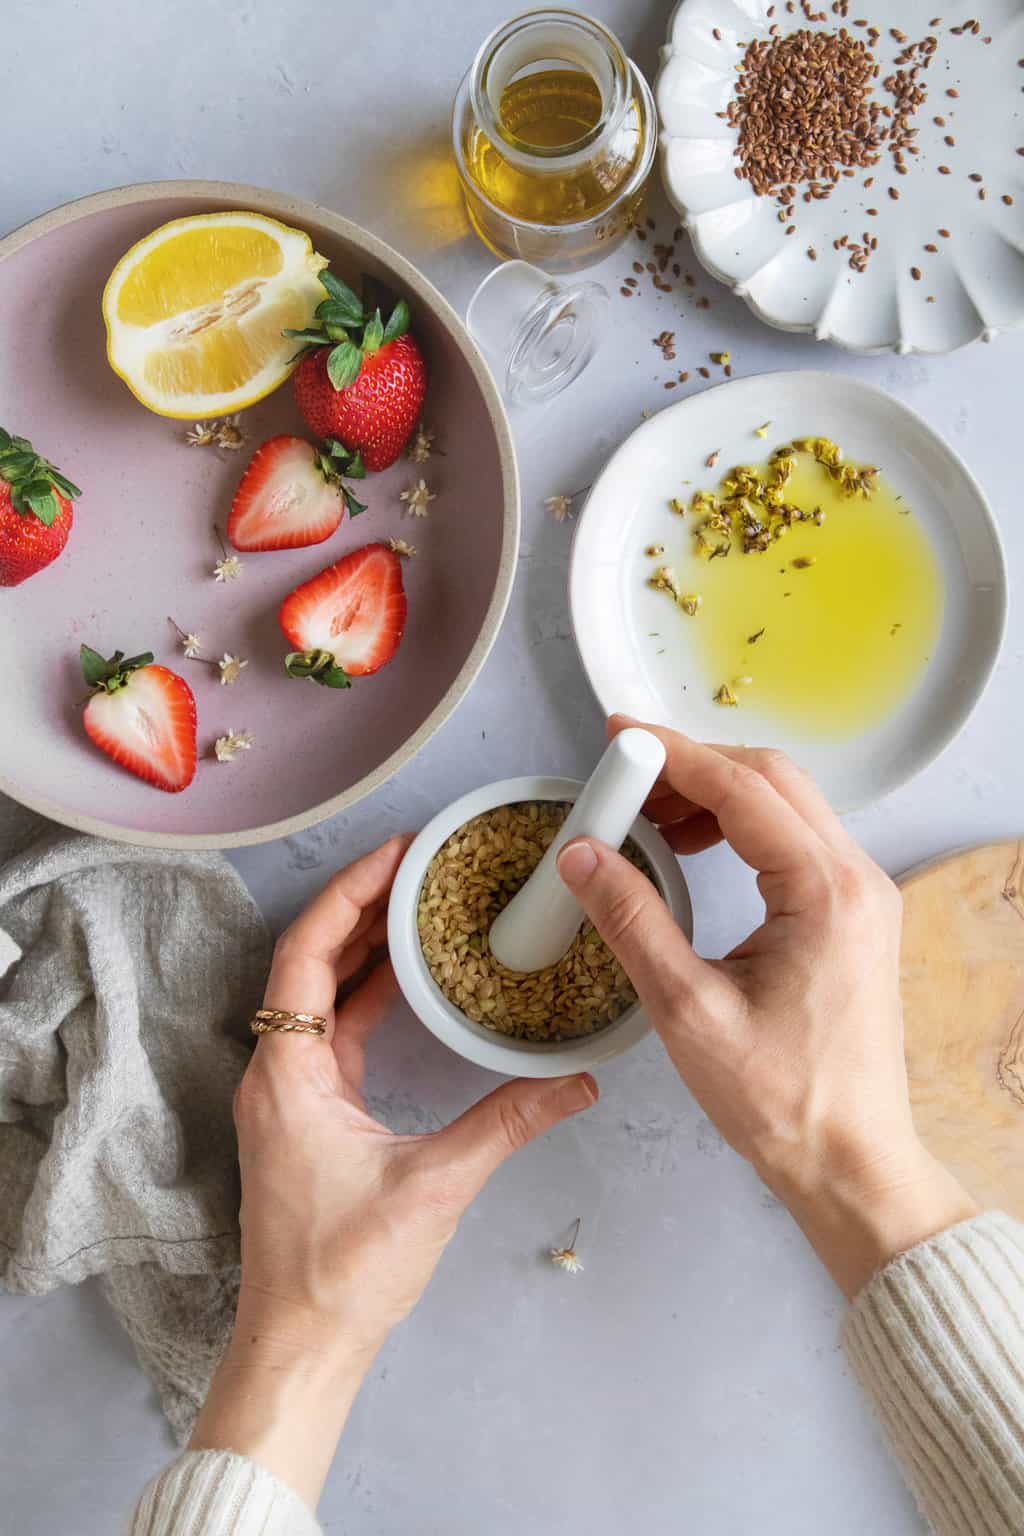 14 Homemade Face Scrubs With Ingredients From Your Kitchen